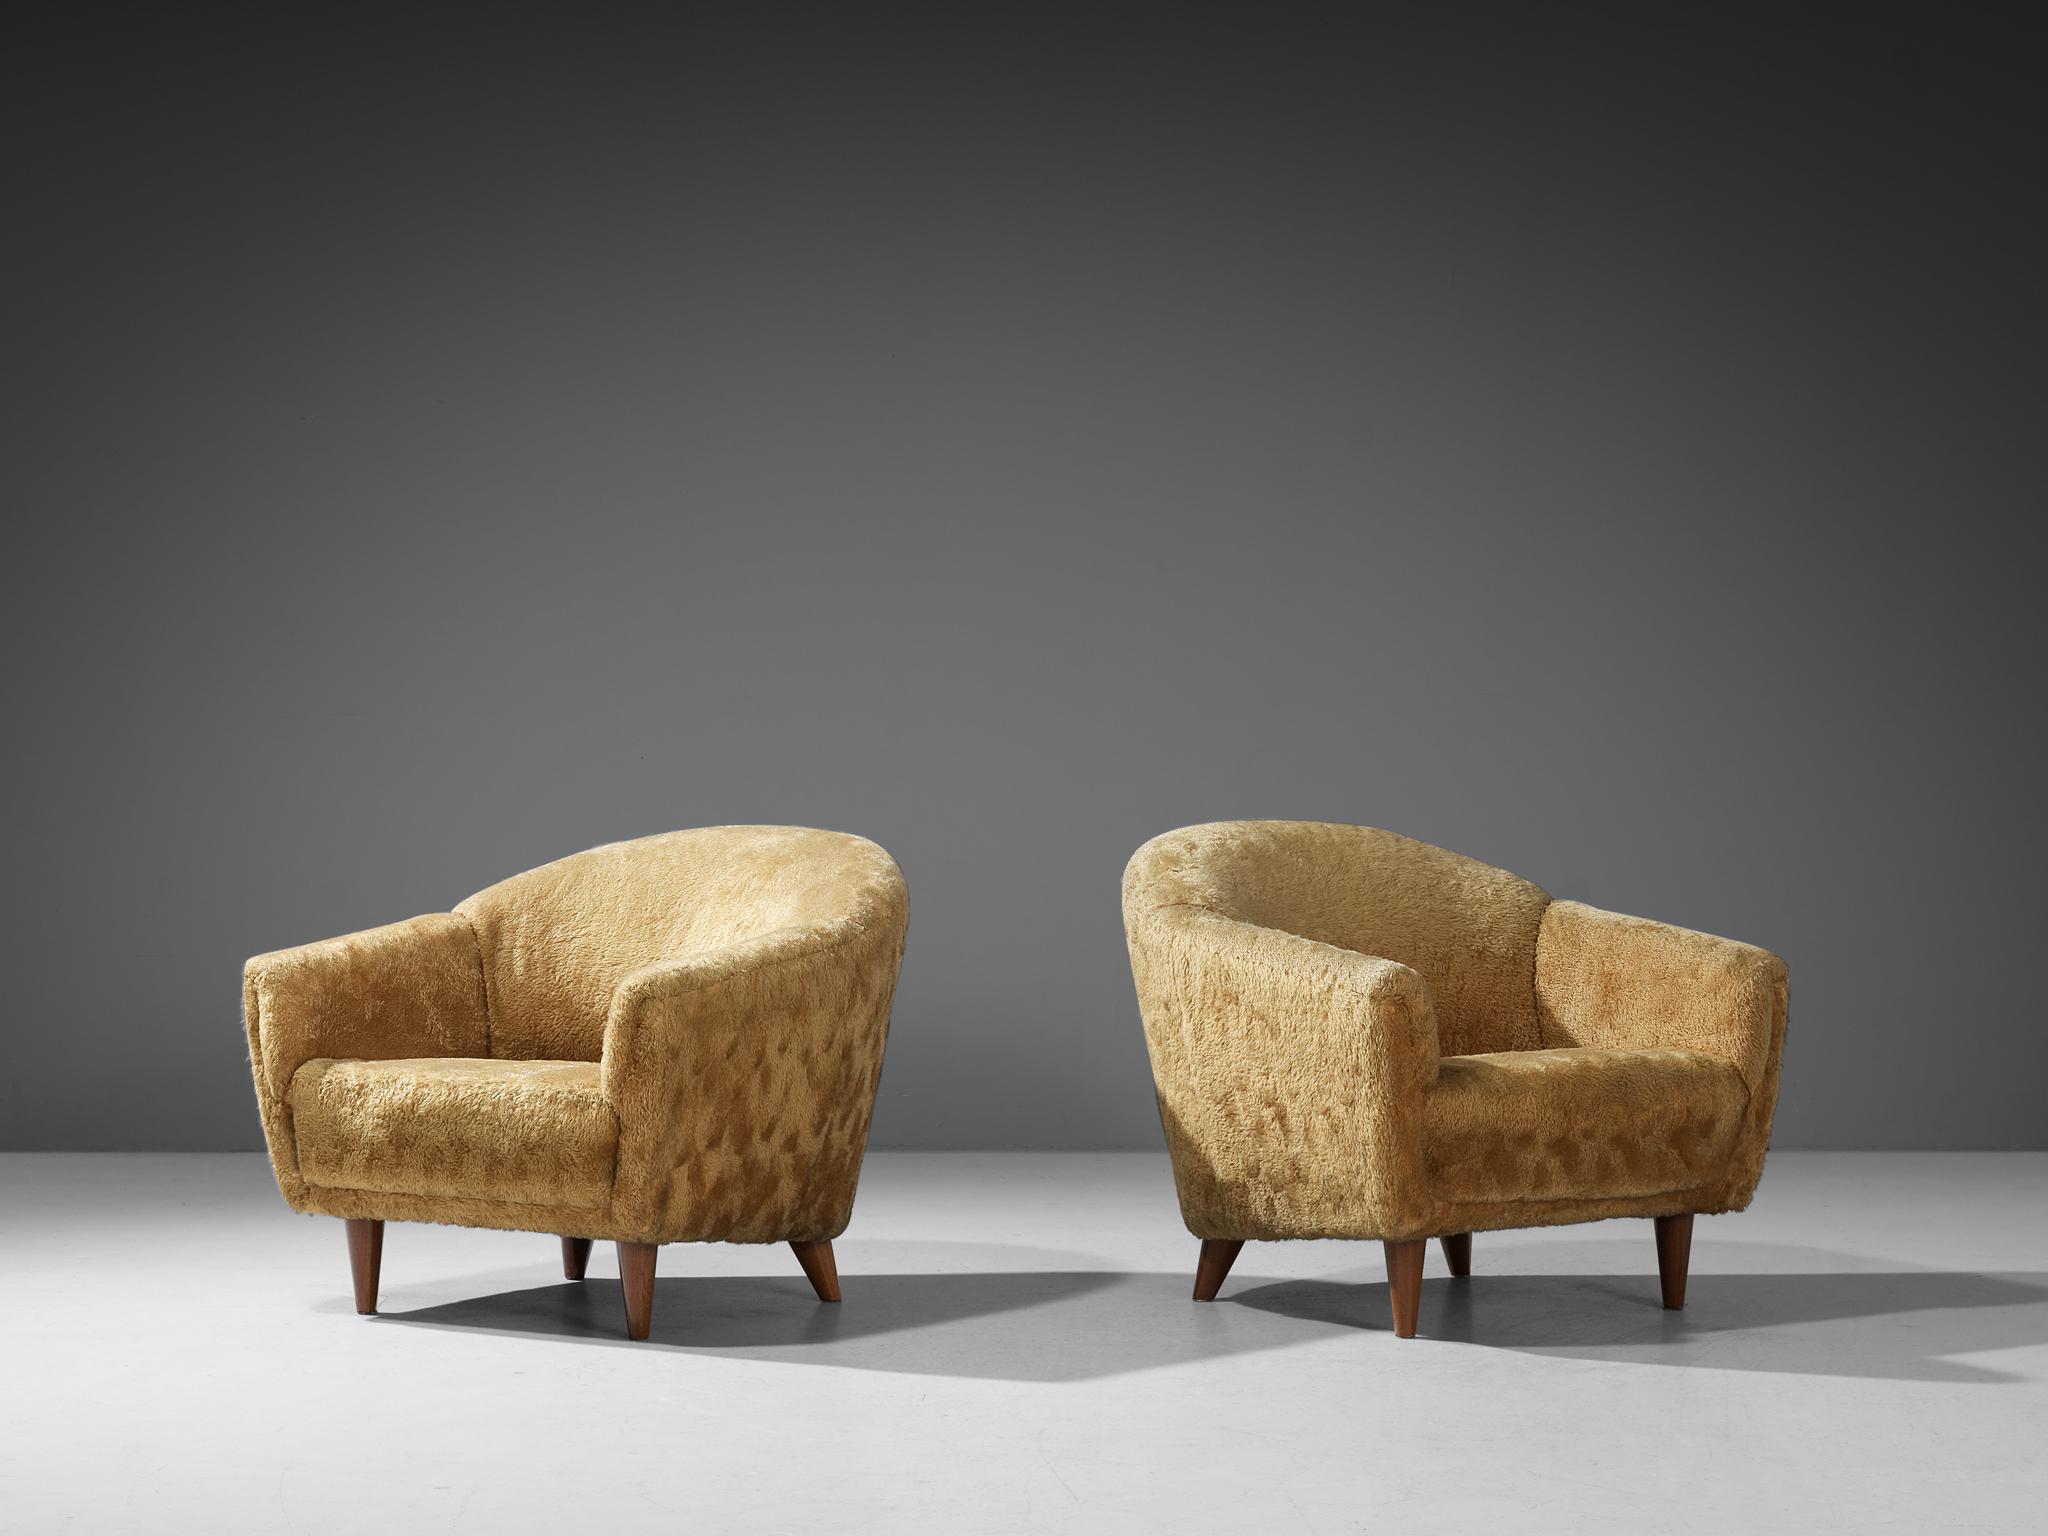 Lounge chairs, teddy upholstery and beech, Europe, 1950s

This pair of bulky lounge chairs are furnished with wooden legs and a yellow teddy upholstery. The lounge chairs have a high lined and slightly curved back, while the backrest is horizontal